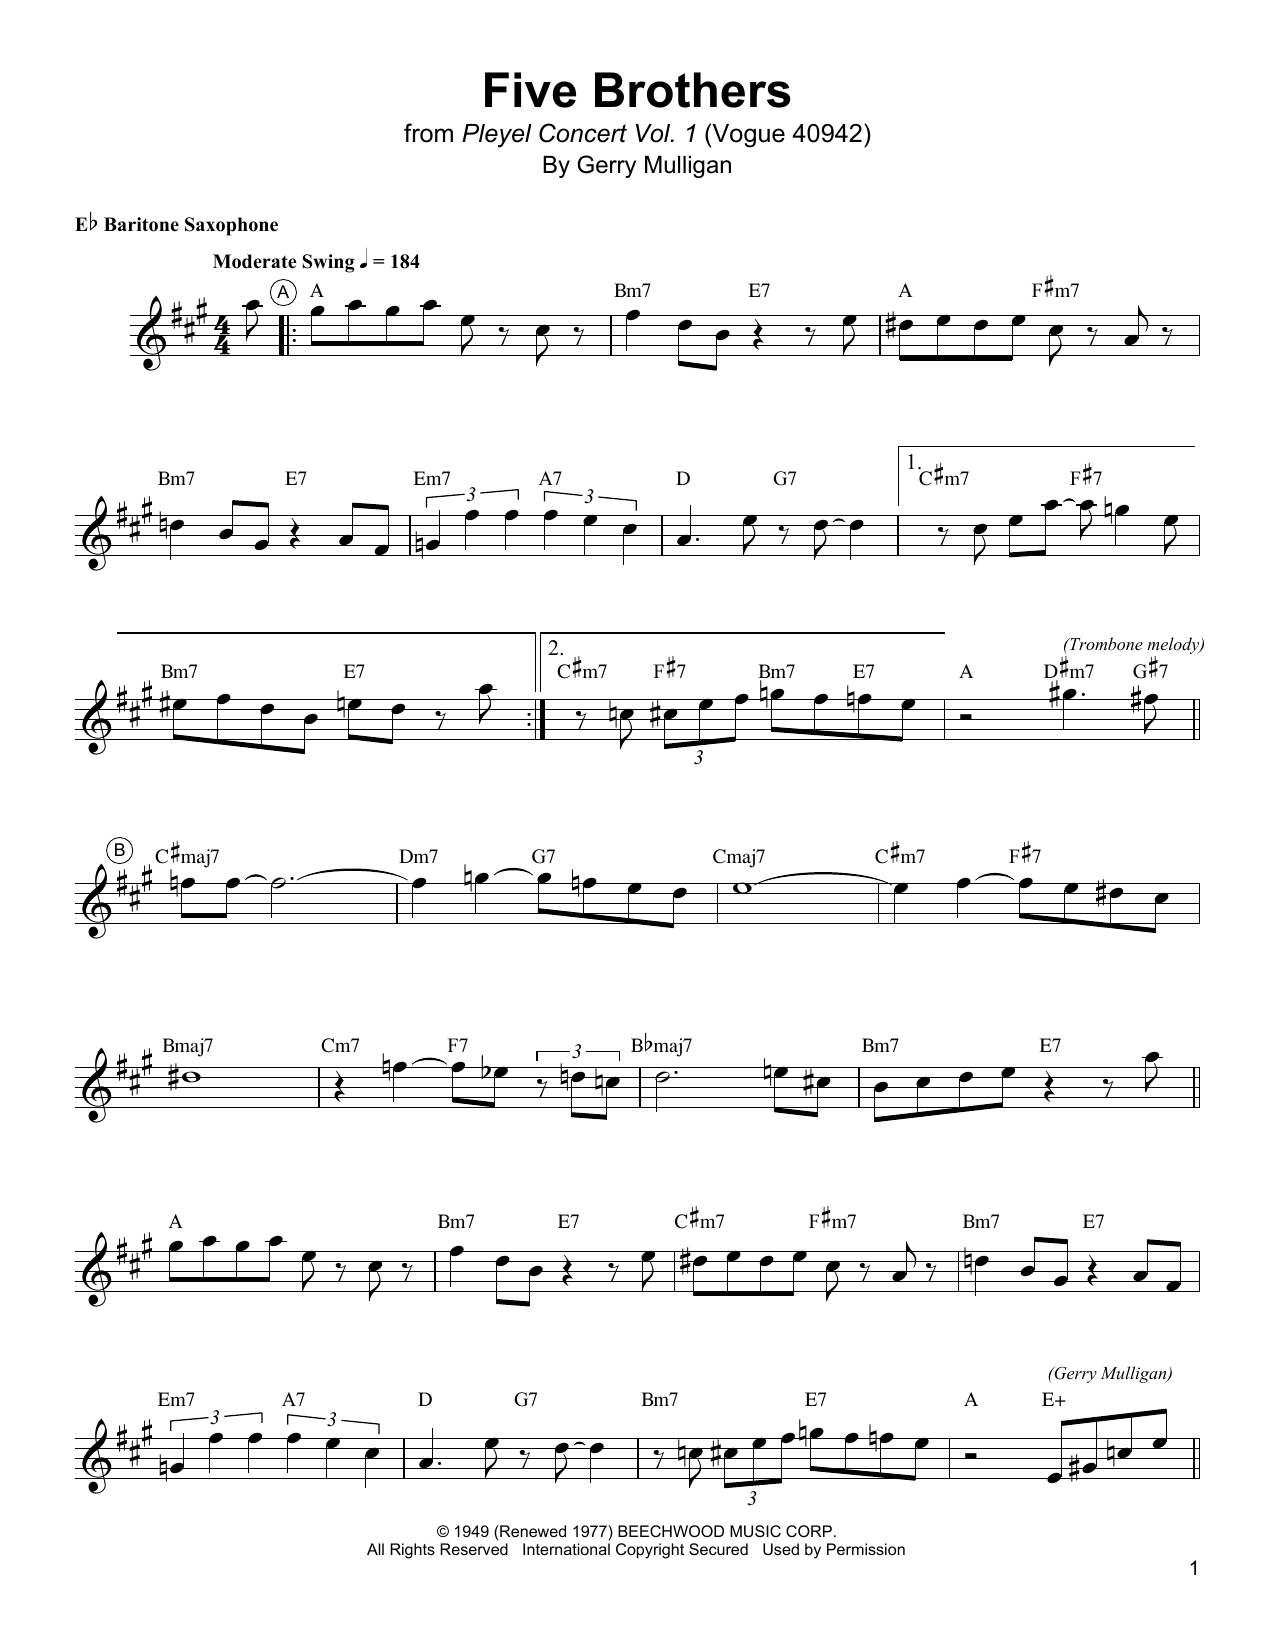 Download Gerry Mulligan Five Brothers Sheet Music